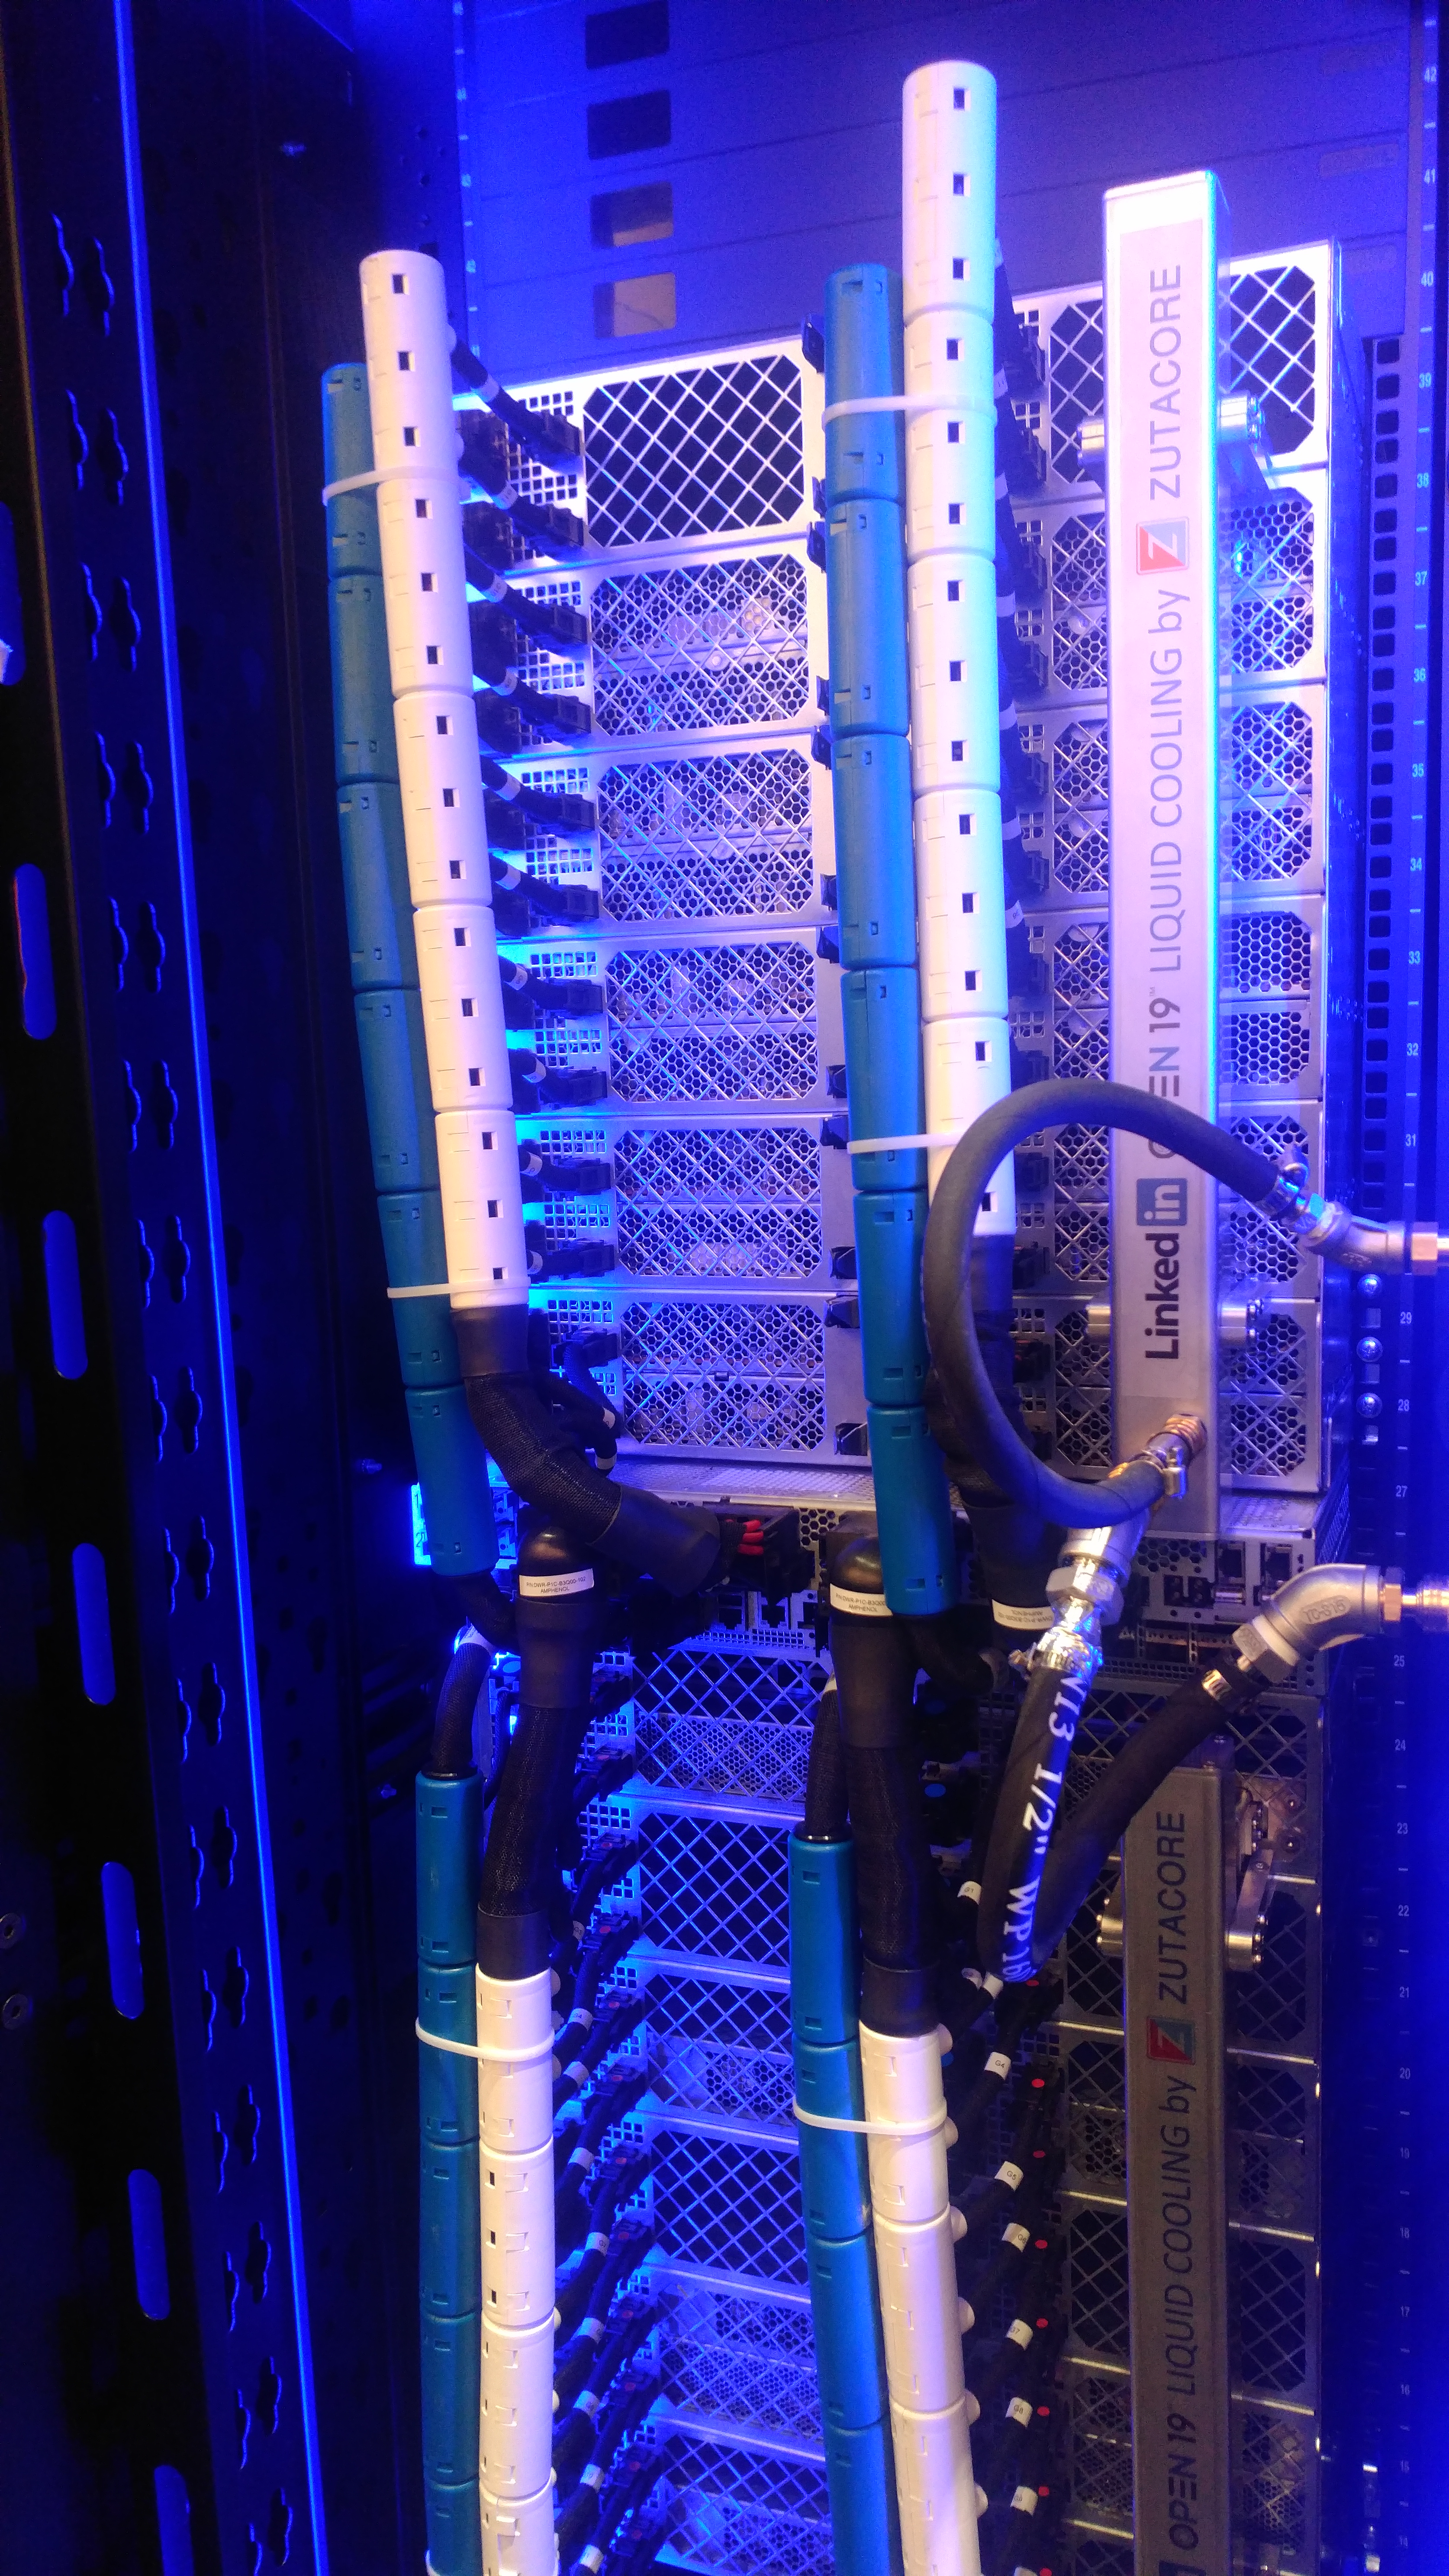 An Open19 rack with the ZutaCore liquid cooling system on display at the OCP Global Summit 2019